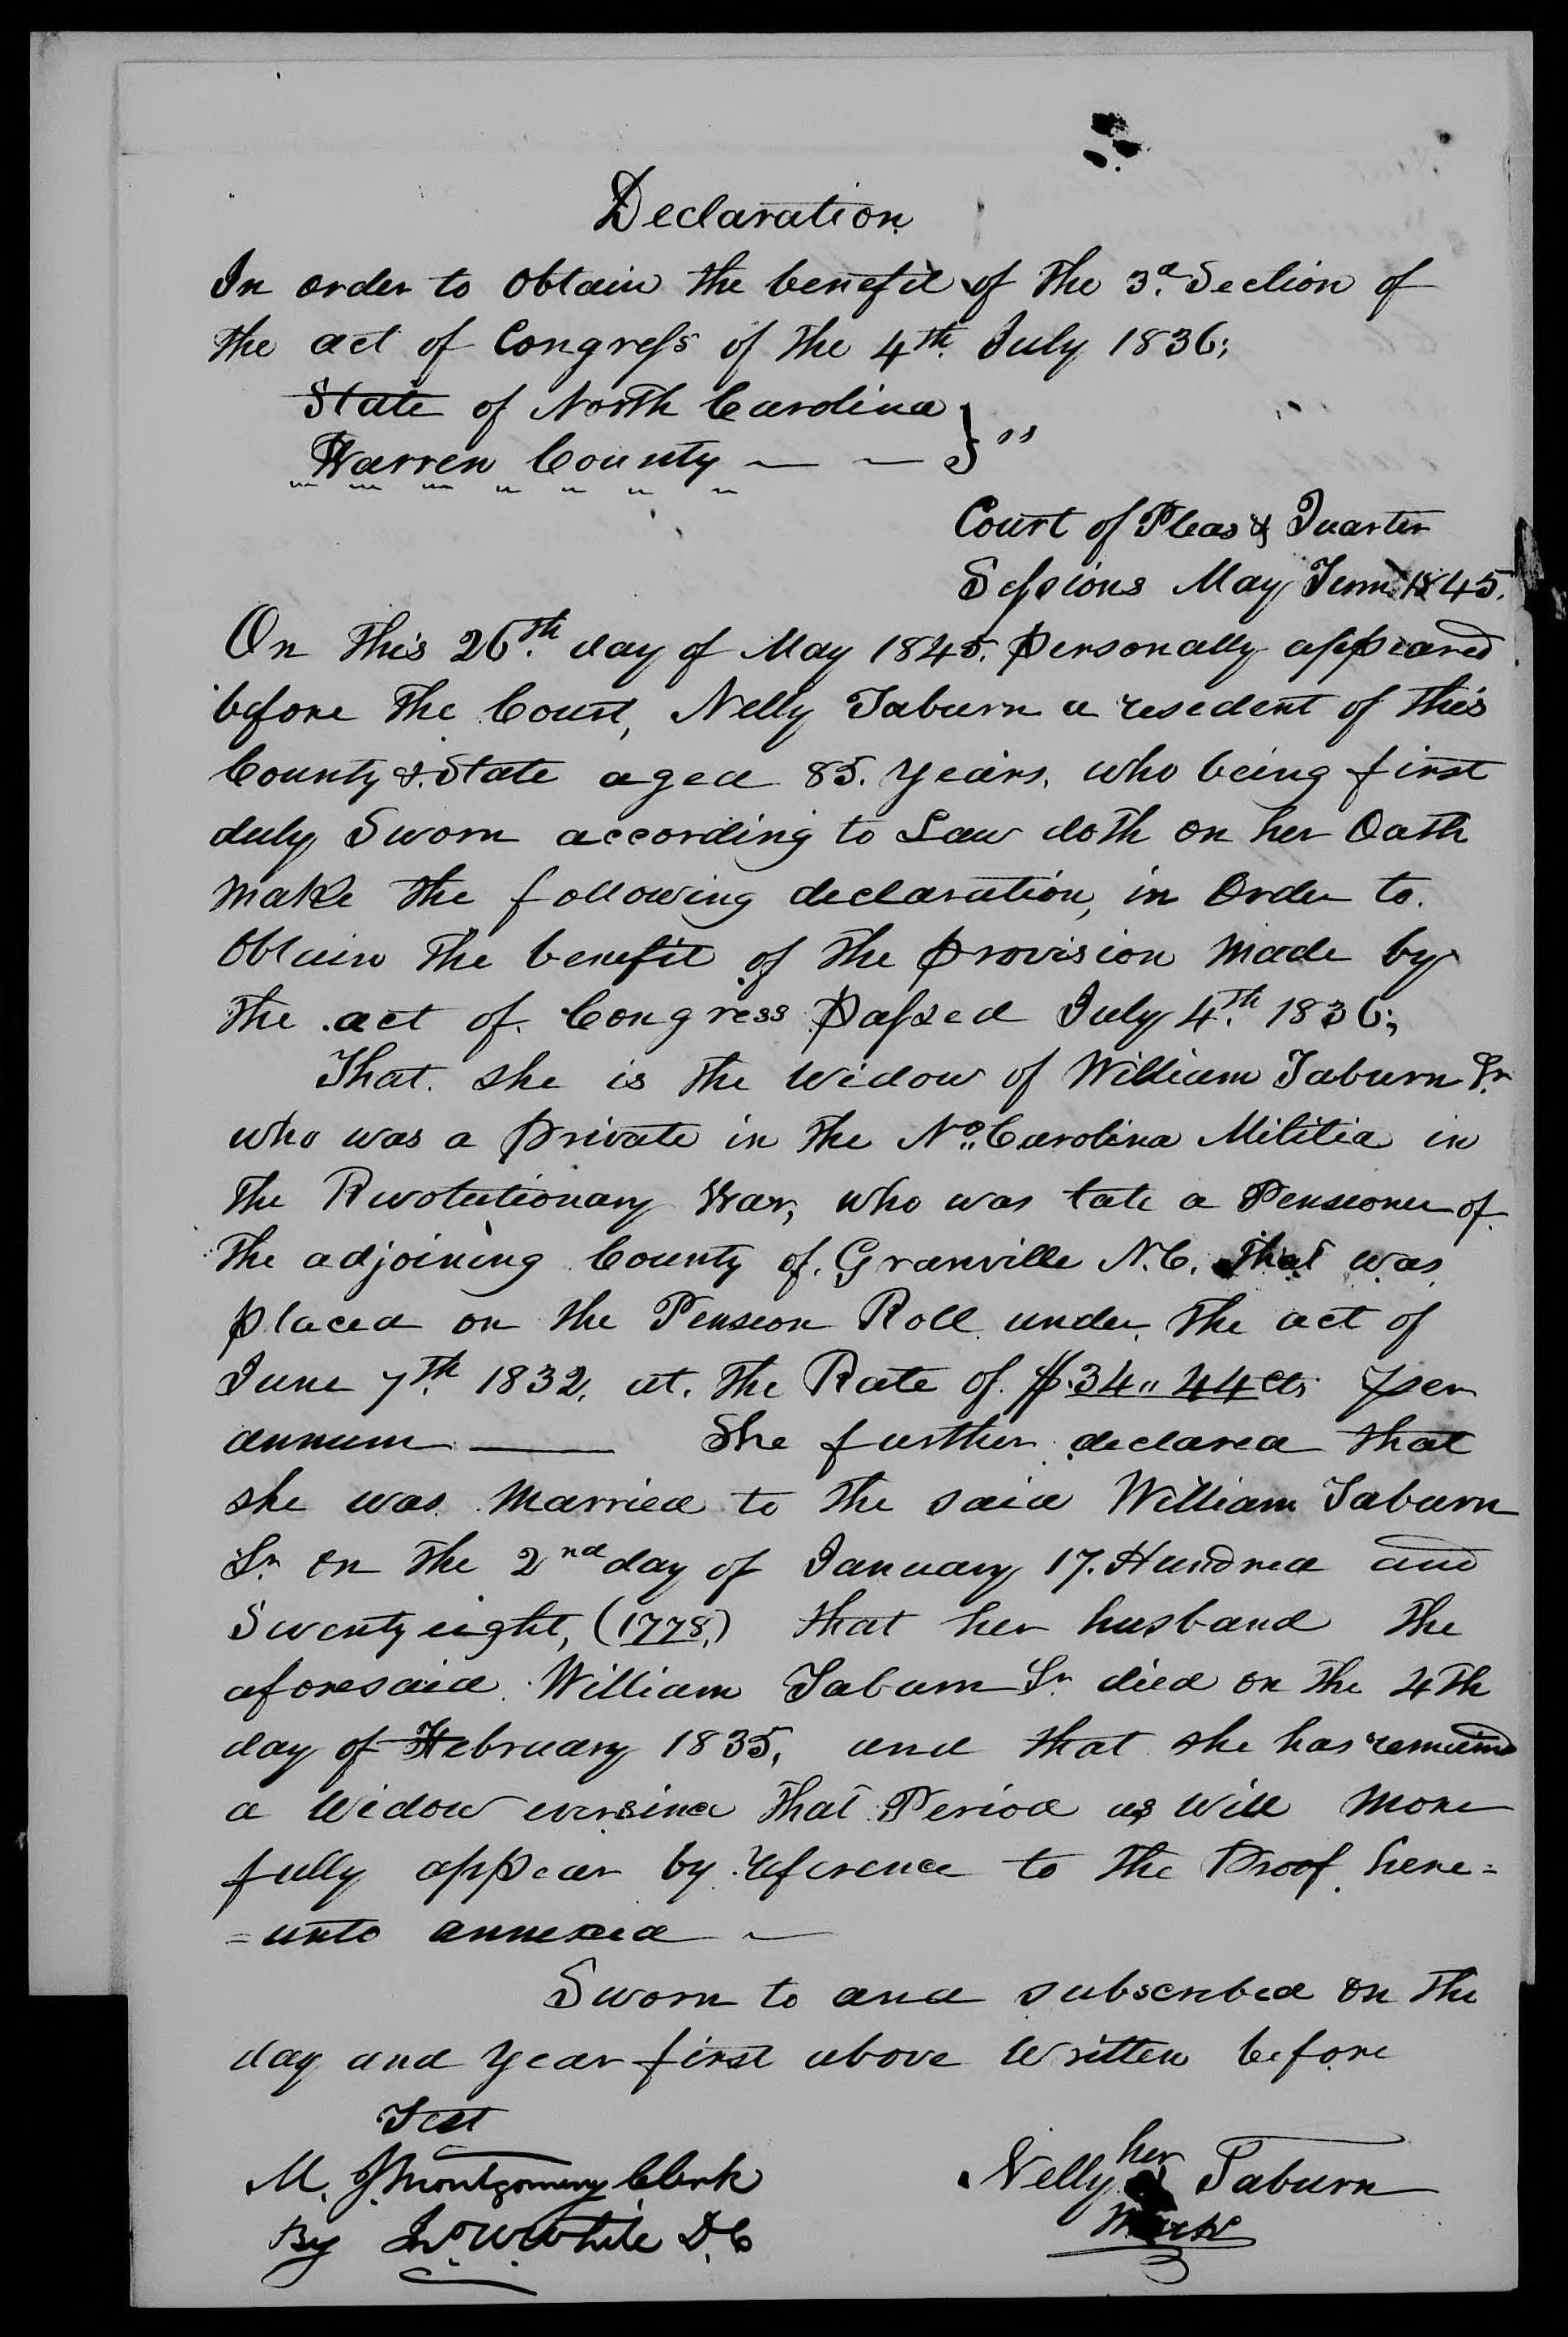 Application for a Widow's Pension from Nelly Taburn, 26 May 1845, page 1